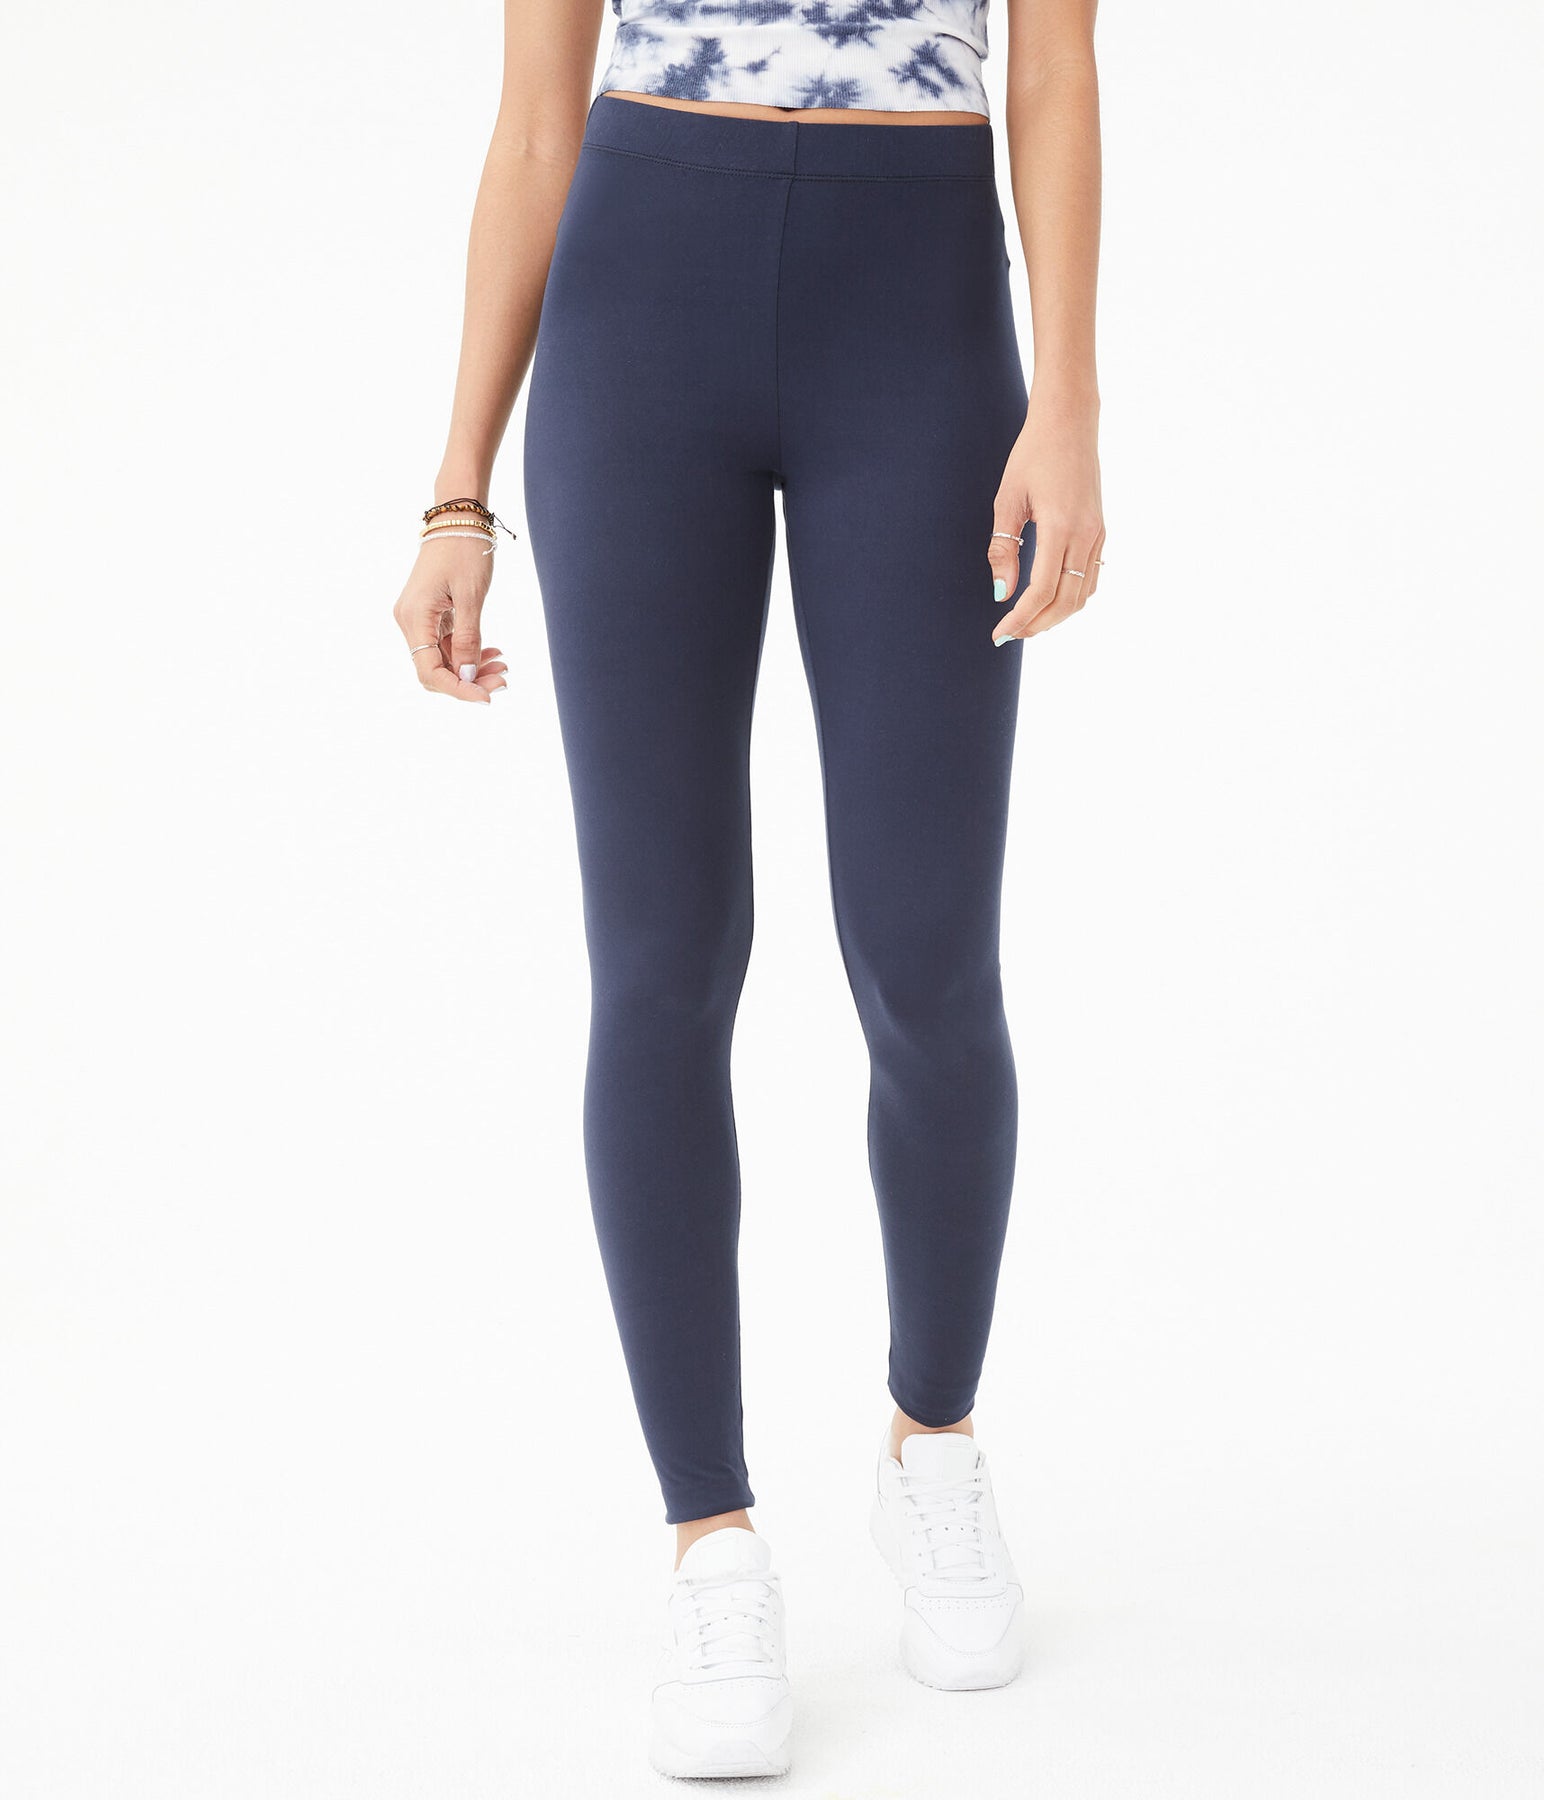 Aeropostale Women's Seriously Soft Colored Leggings (various sizes) only  $5.95